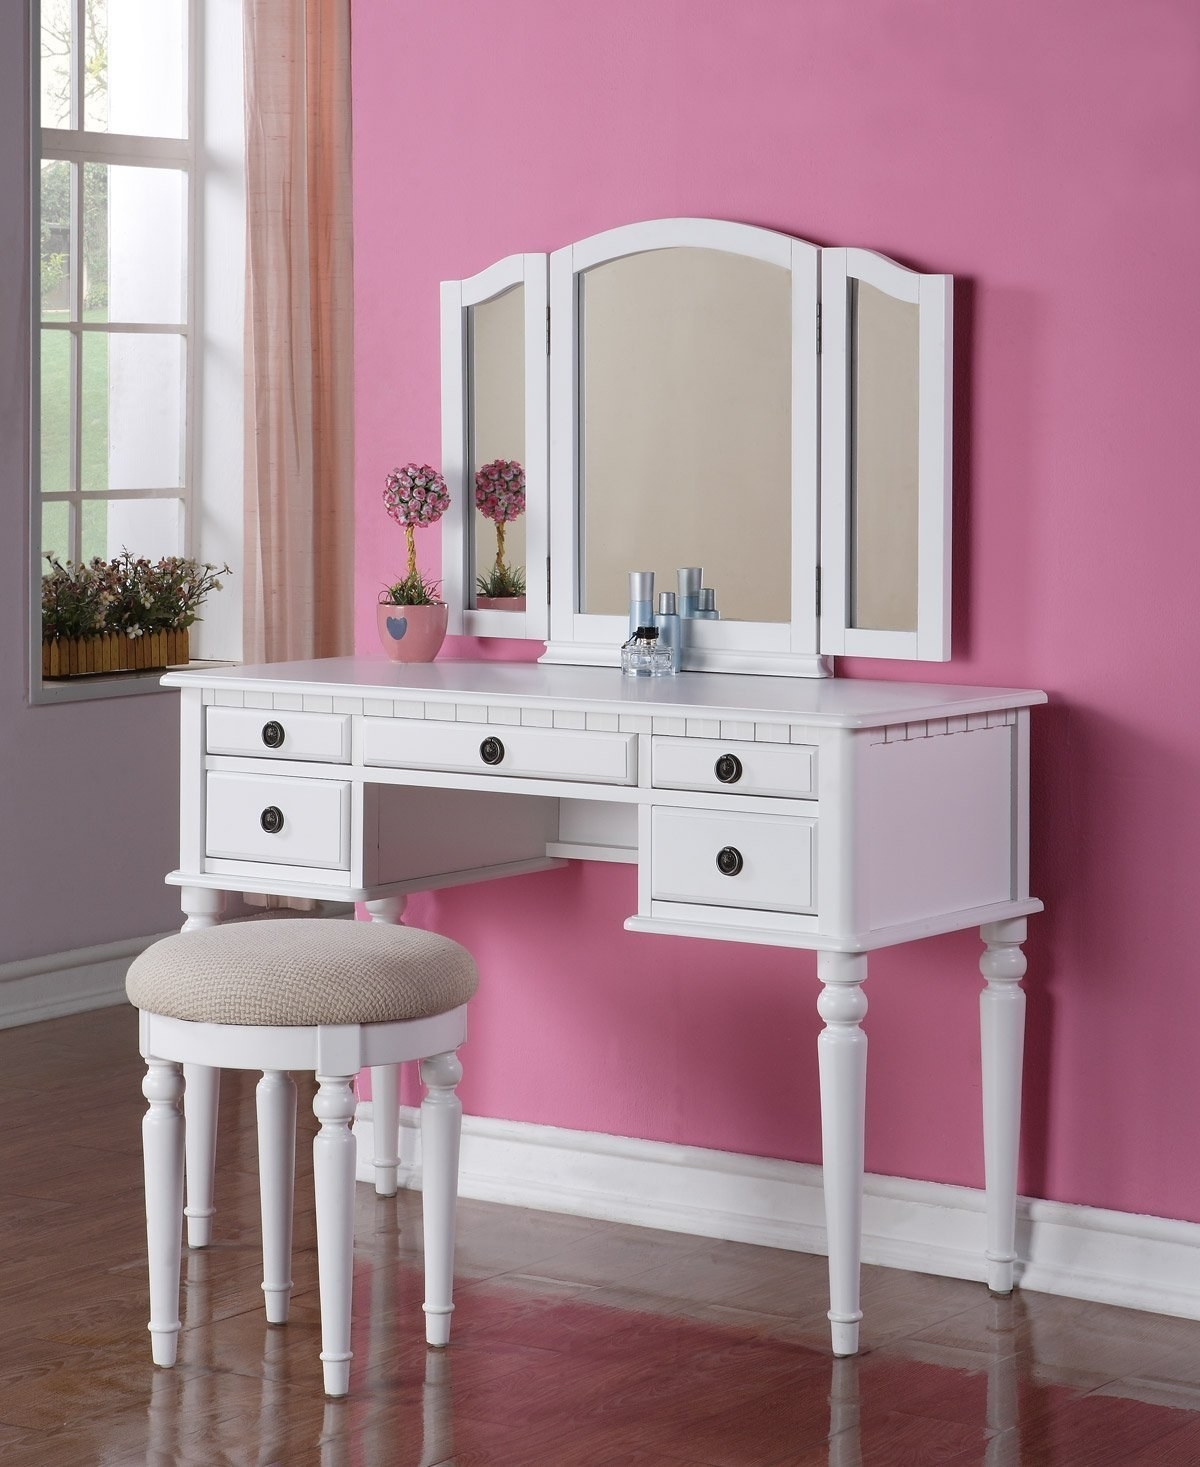 The vanity with five drawers in the front and a three-part mirror in white with a small stool with a padded fabric top